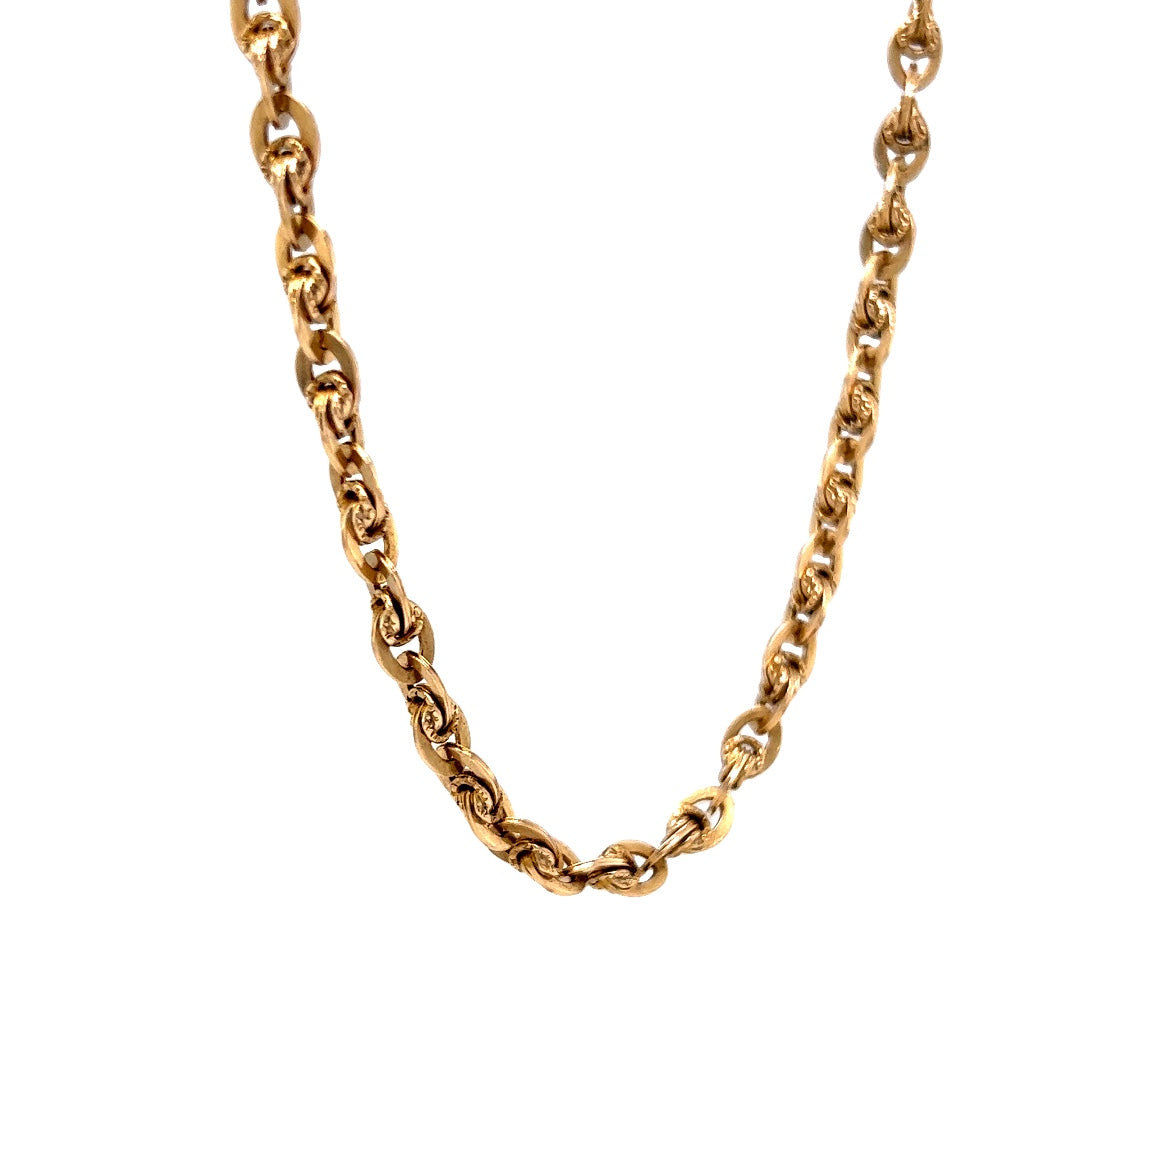 Antique Victorian Chain Necklace in 14k Yellow Gold